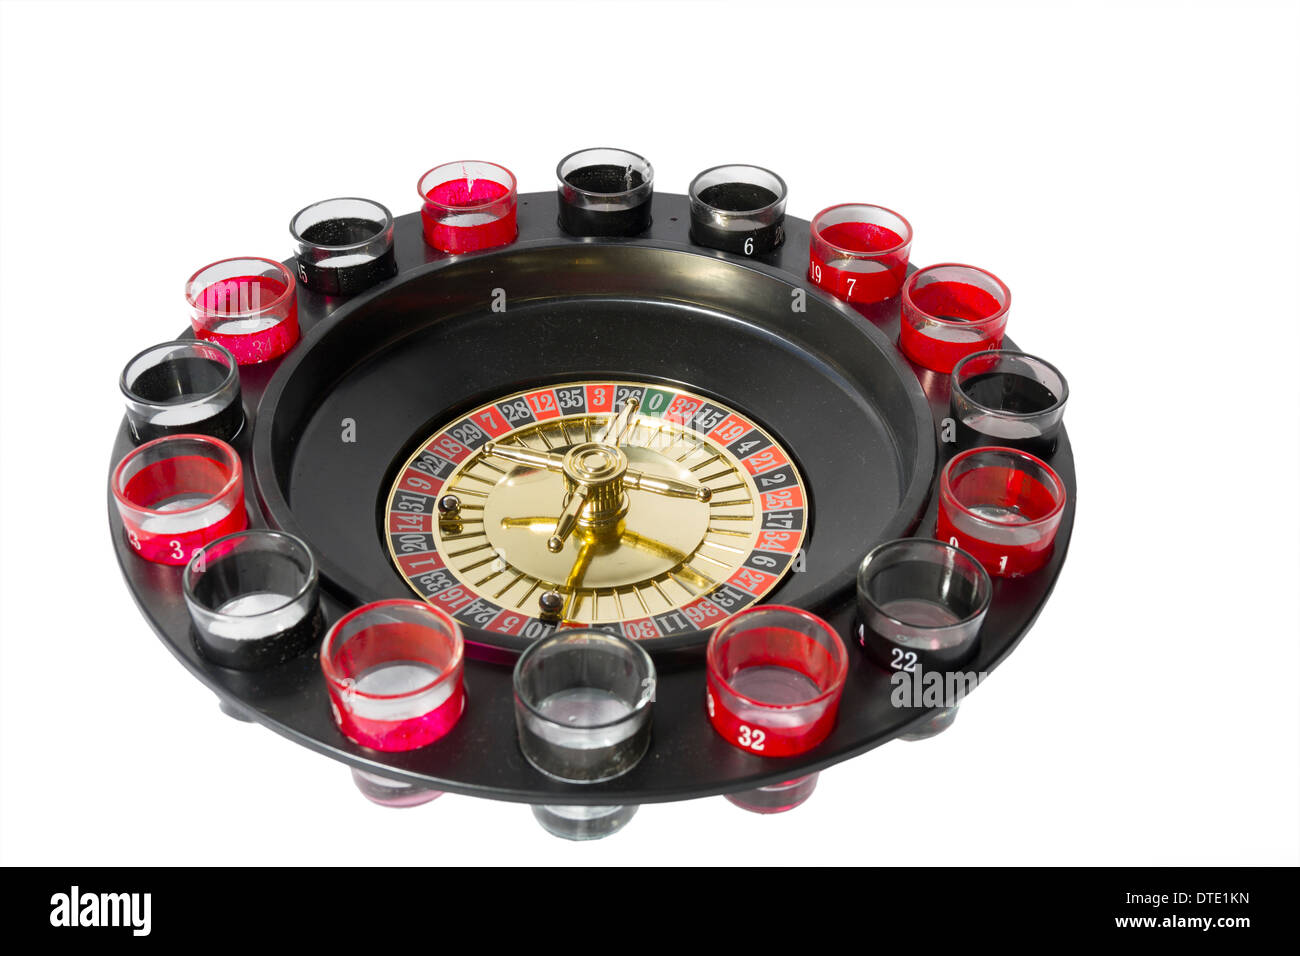 Drinking game roulette wheel Stock Photo